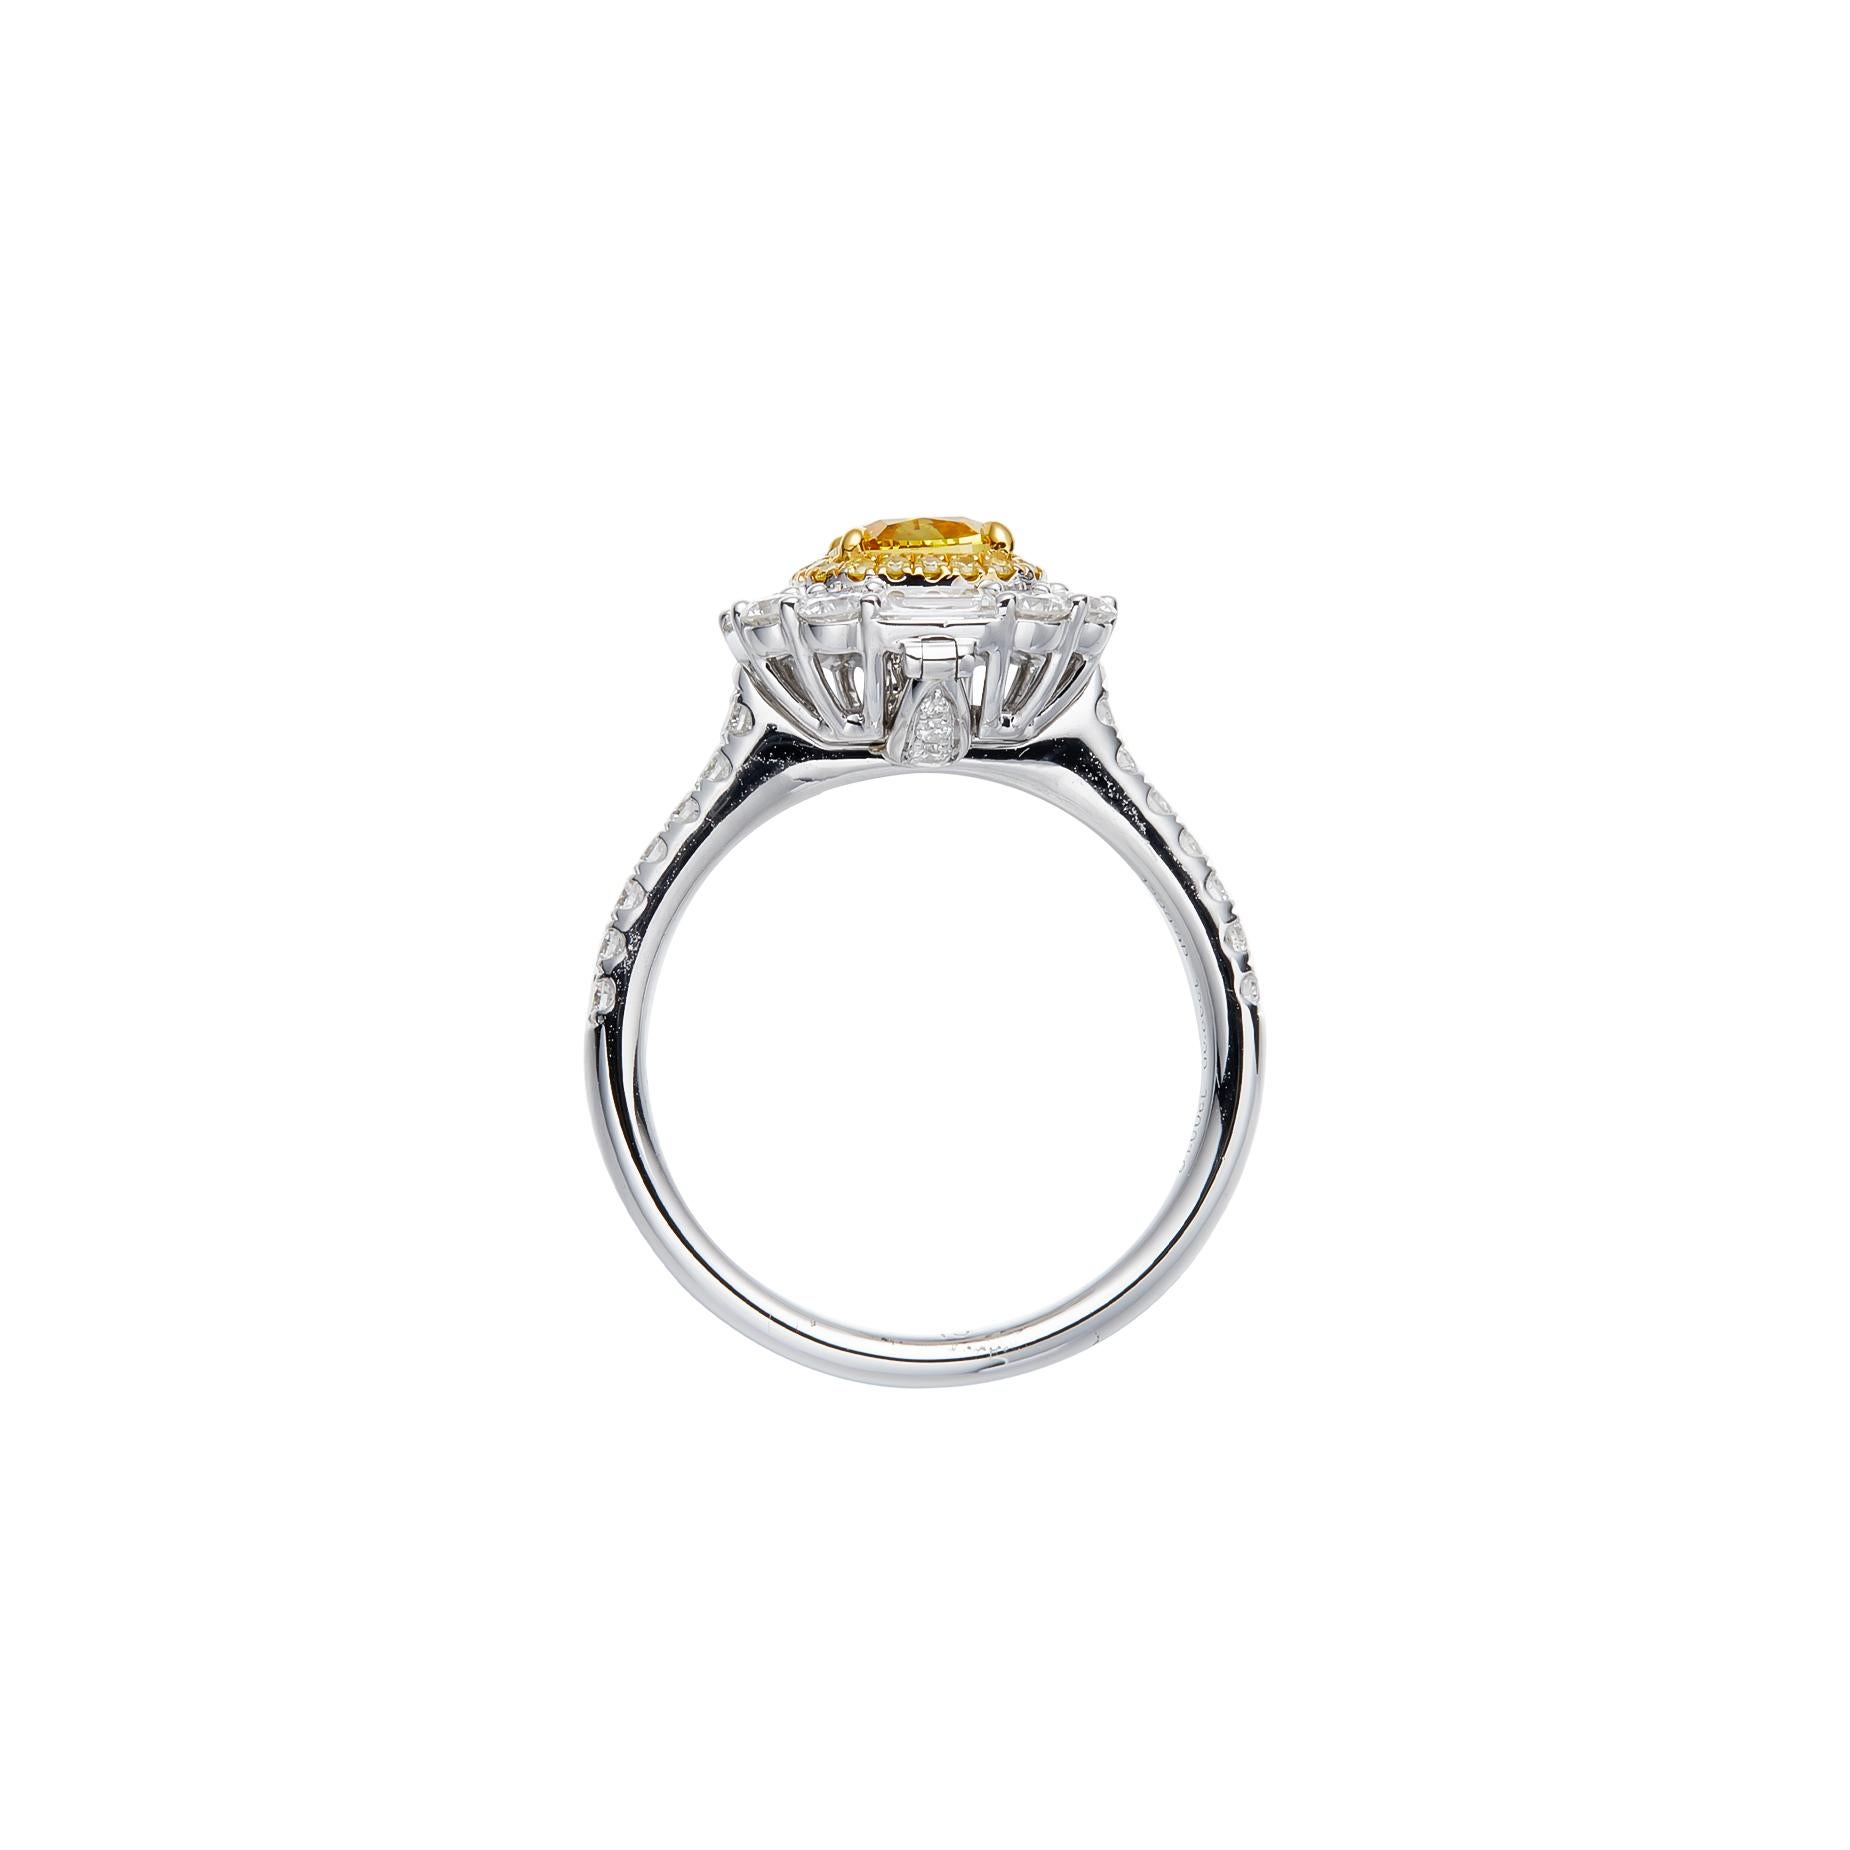 ndulge in the allure of rarity and sophistication with a striking jewelry masterpiece featuring a 1.00 carat natural cushion cut fancy deep brownish orangy yellow diamond. Set upon a resplendent 18kt gold band, this exquisite piece showcases a